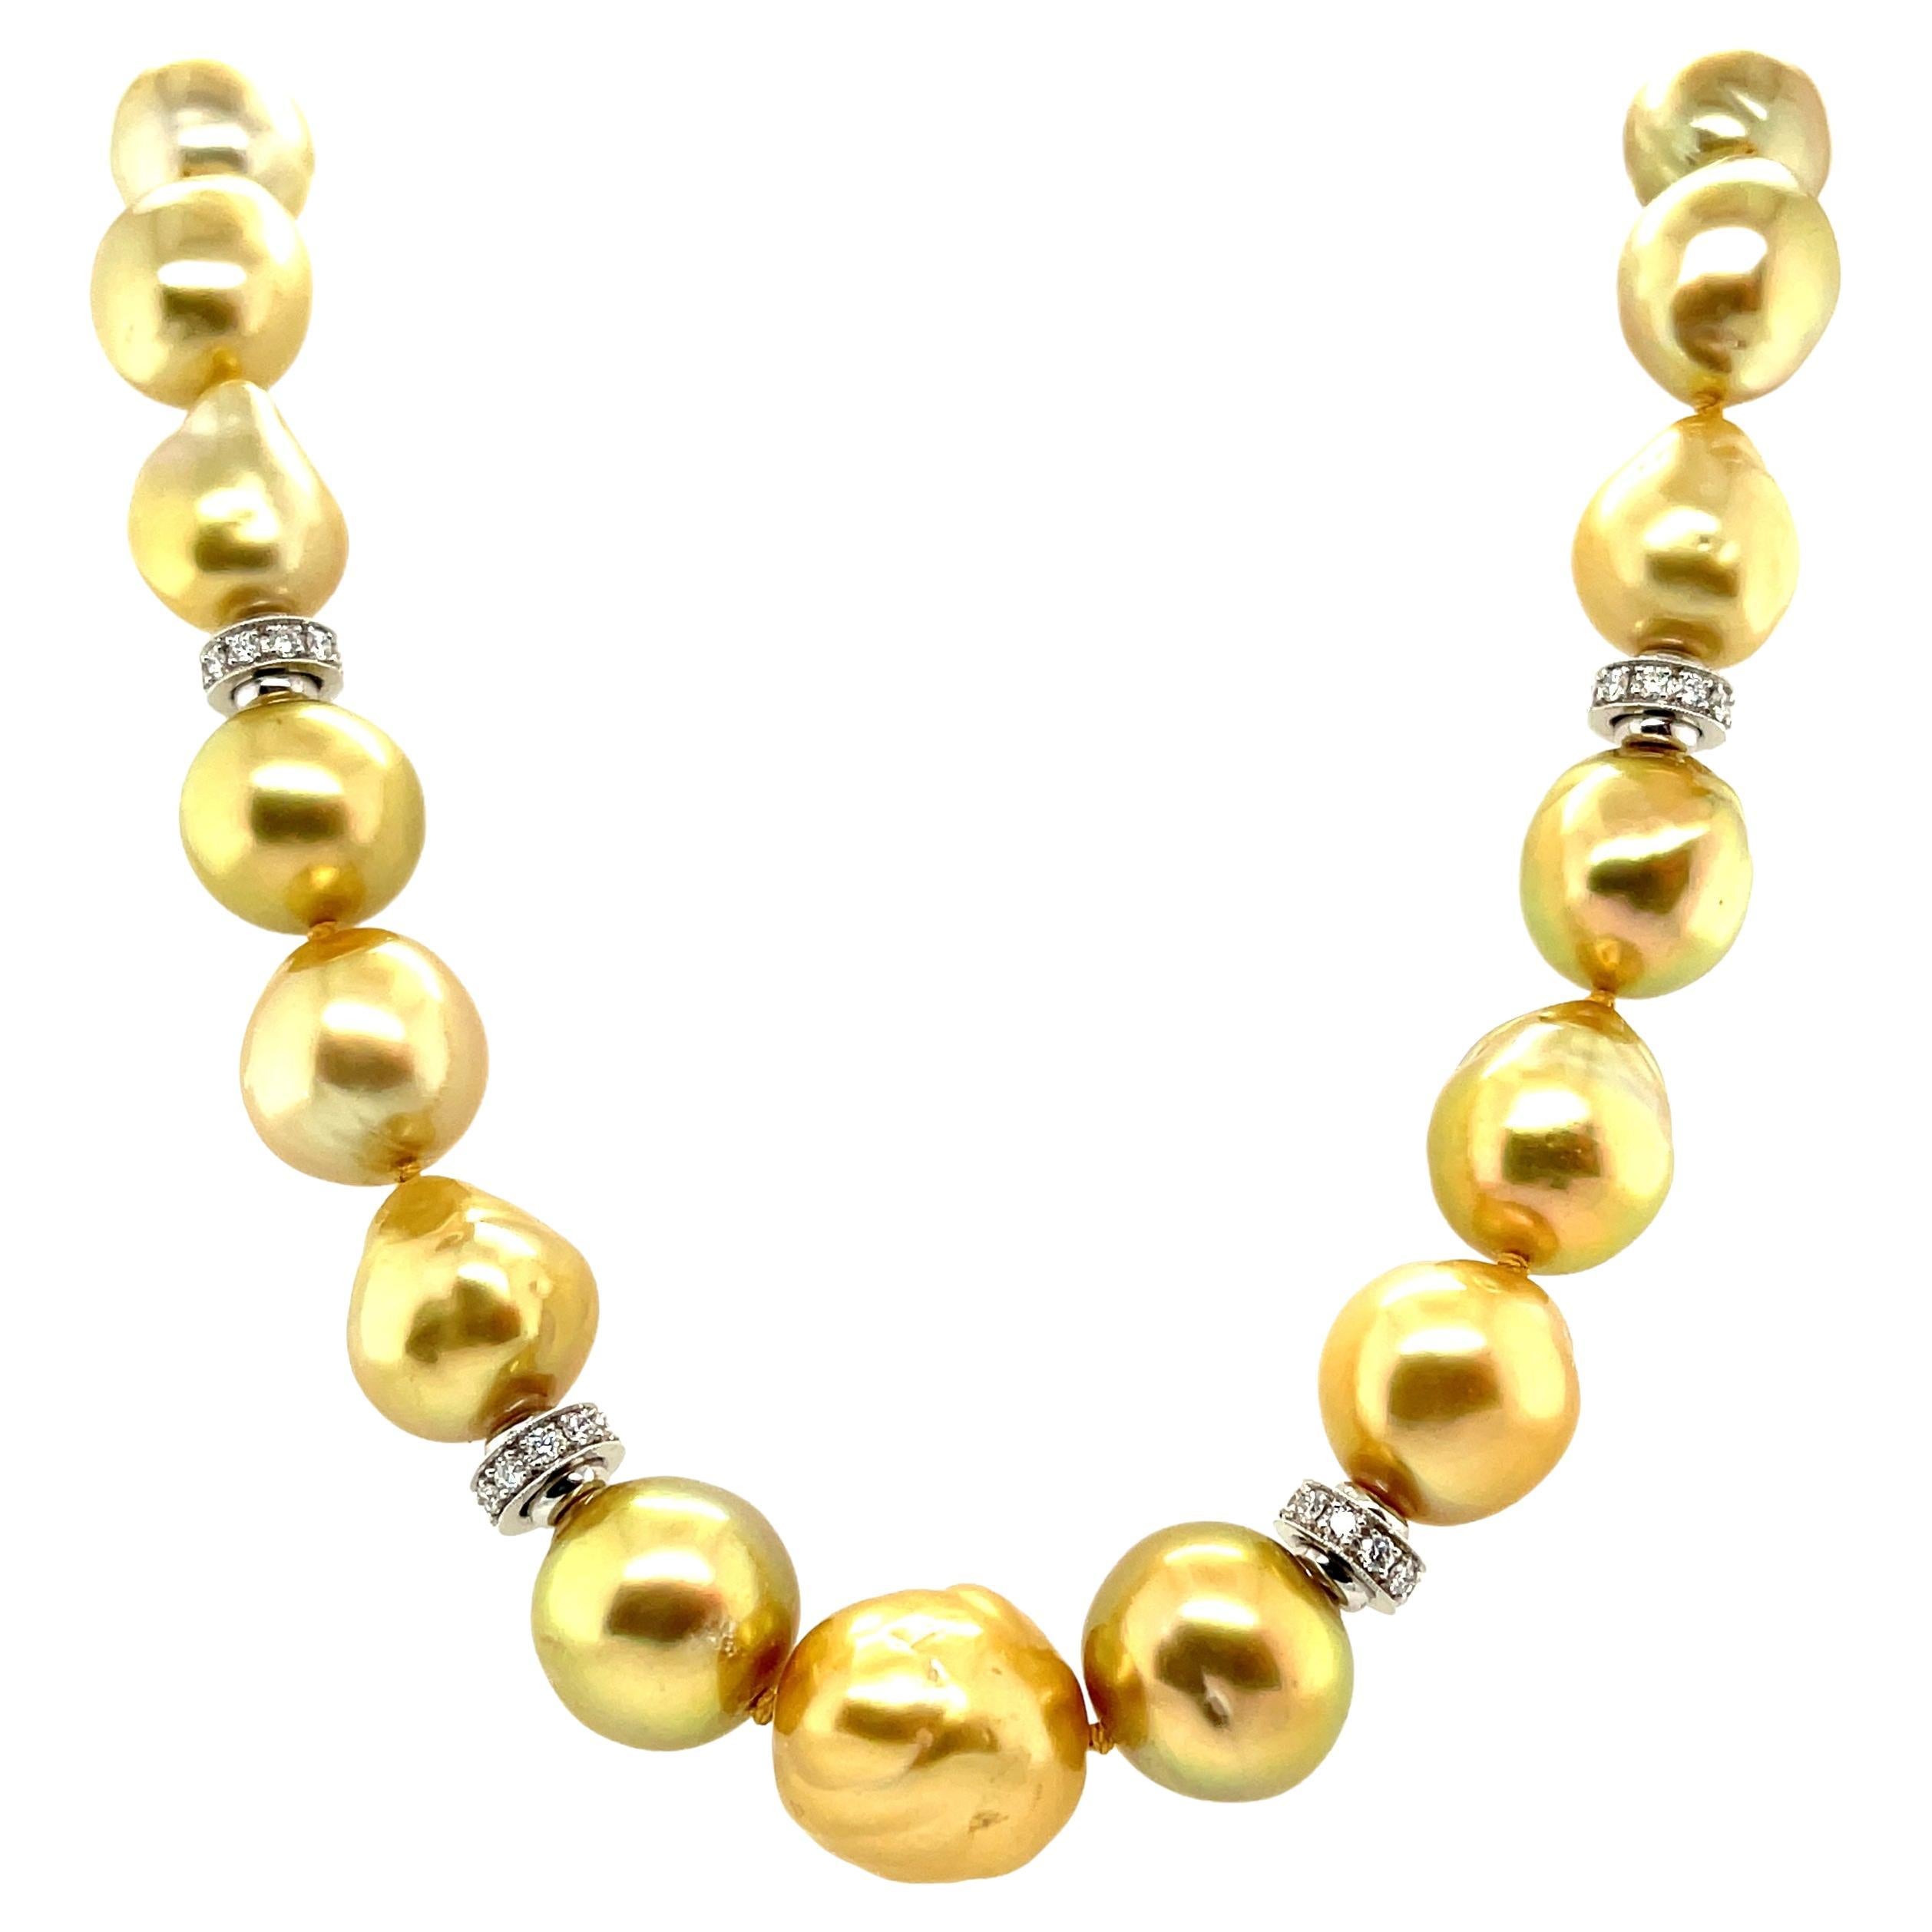 Golden South Seas Pearl Necklace with Diamond and Gold Accents, 21 Inches